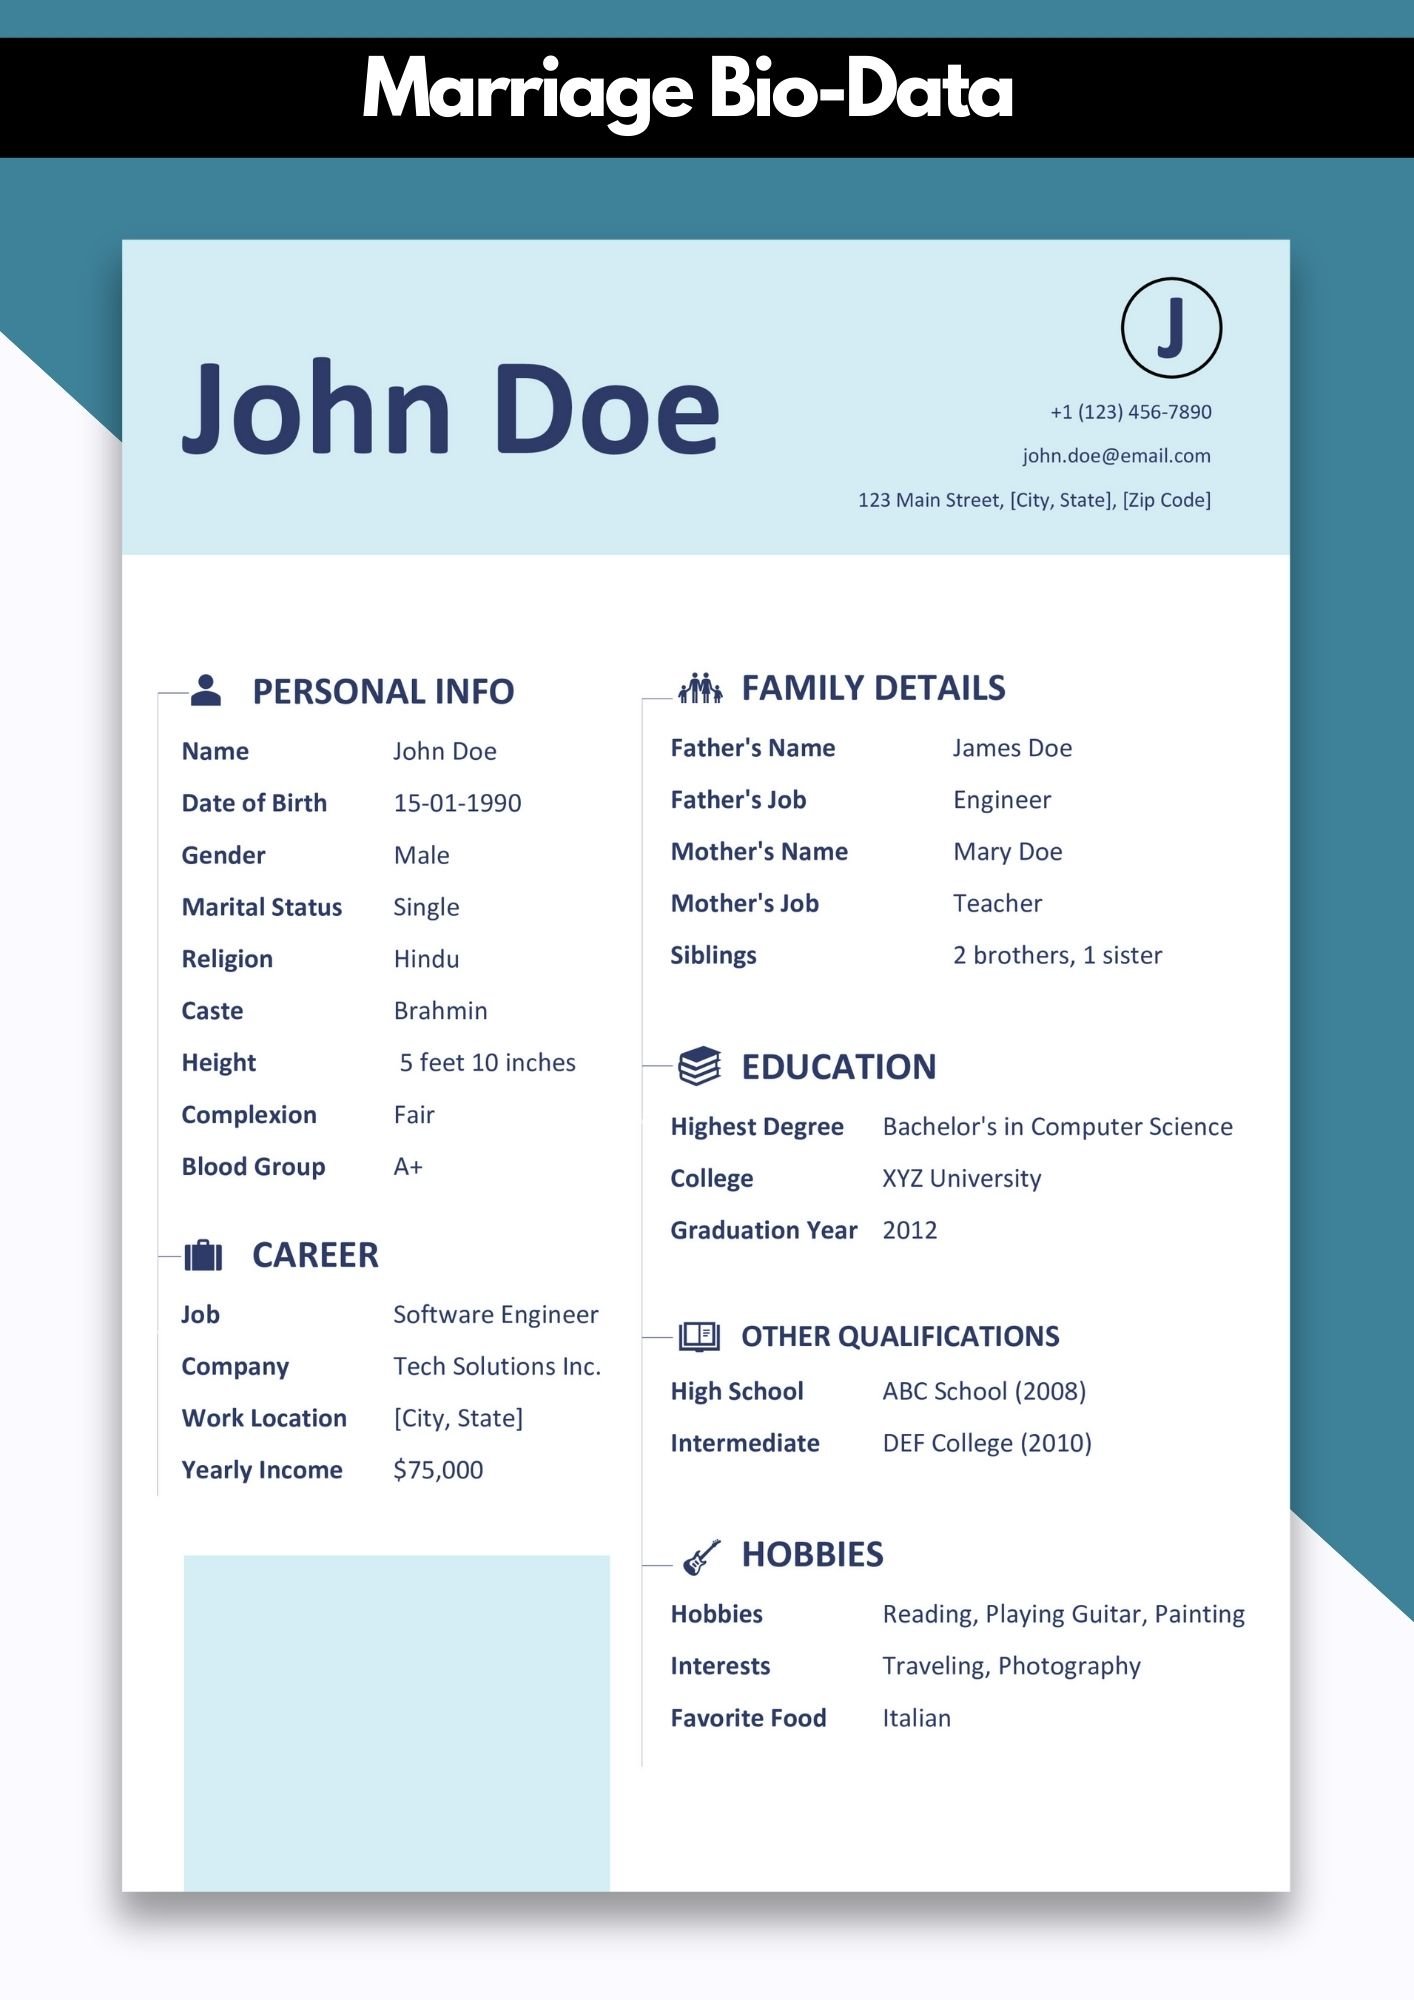 Customize Your Marriage Bio Data Free Templates and Examples